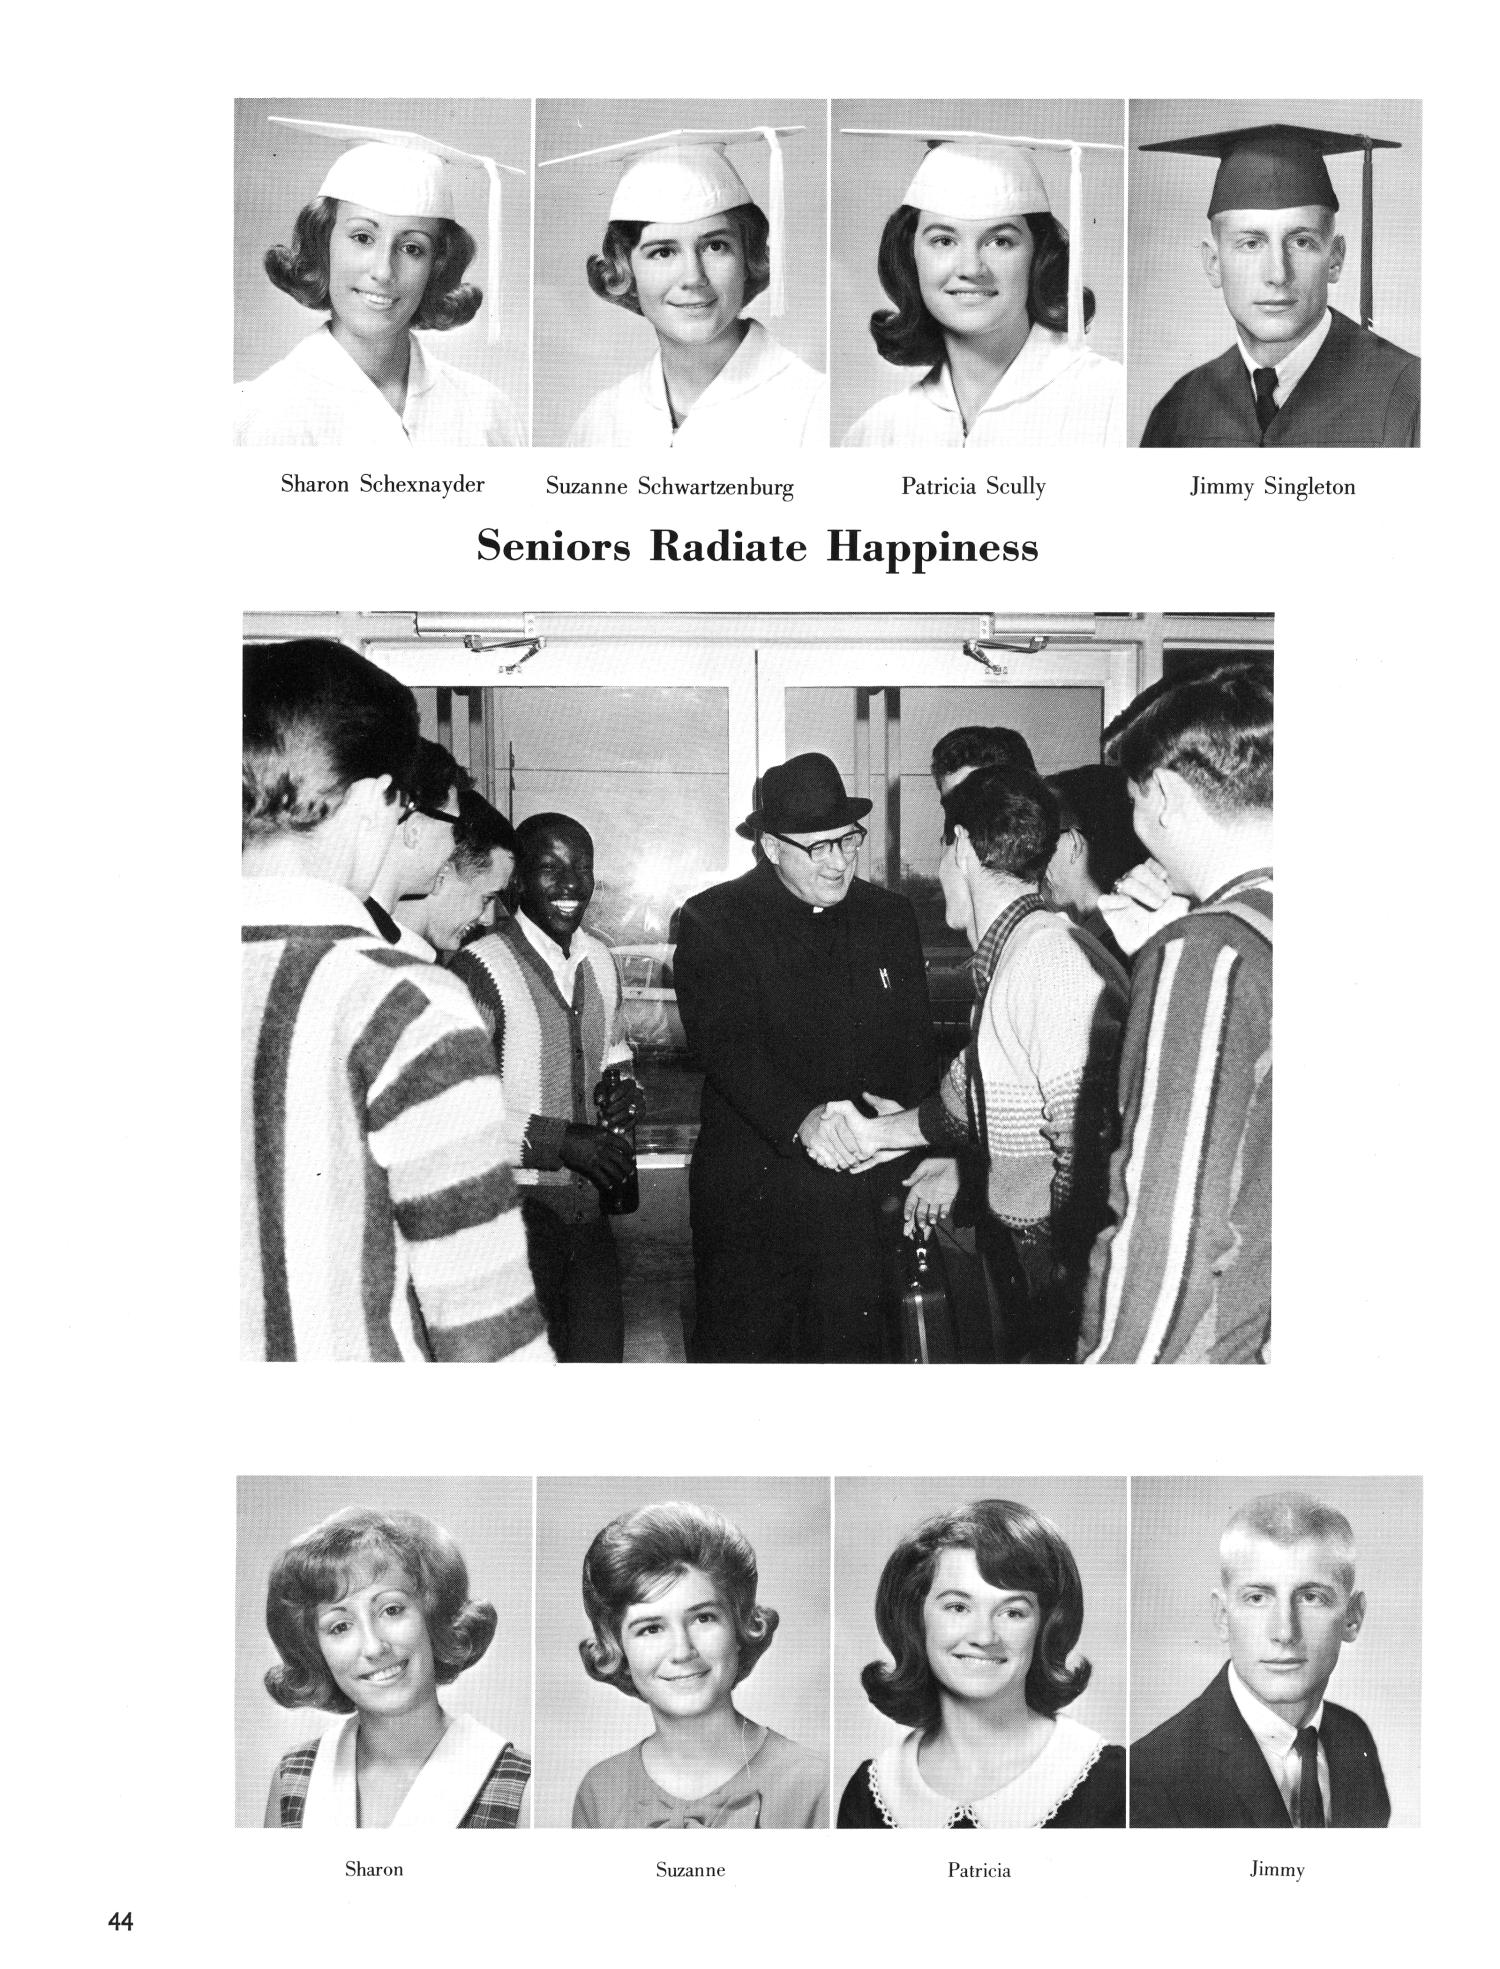 The Christopher, Yearbook of Bishop Byrne High School, 1966
                                                
                                                    44
                                                